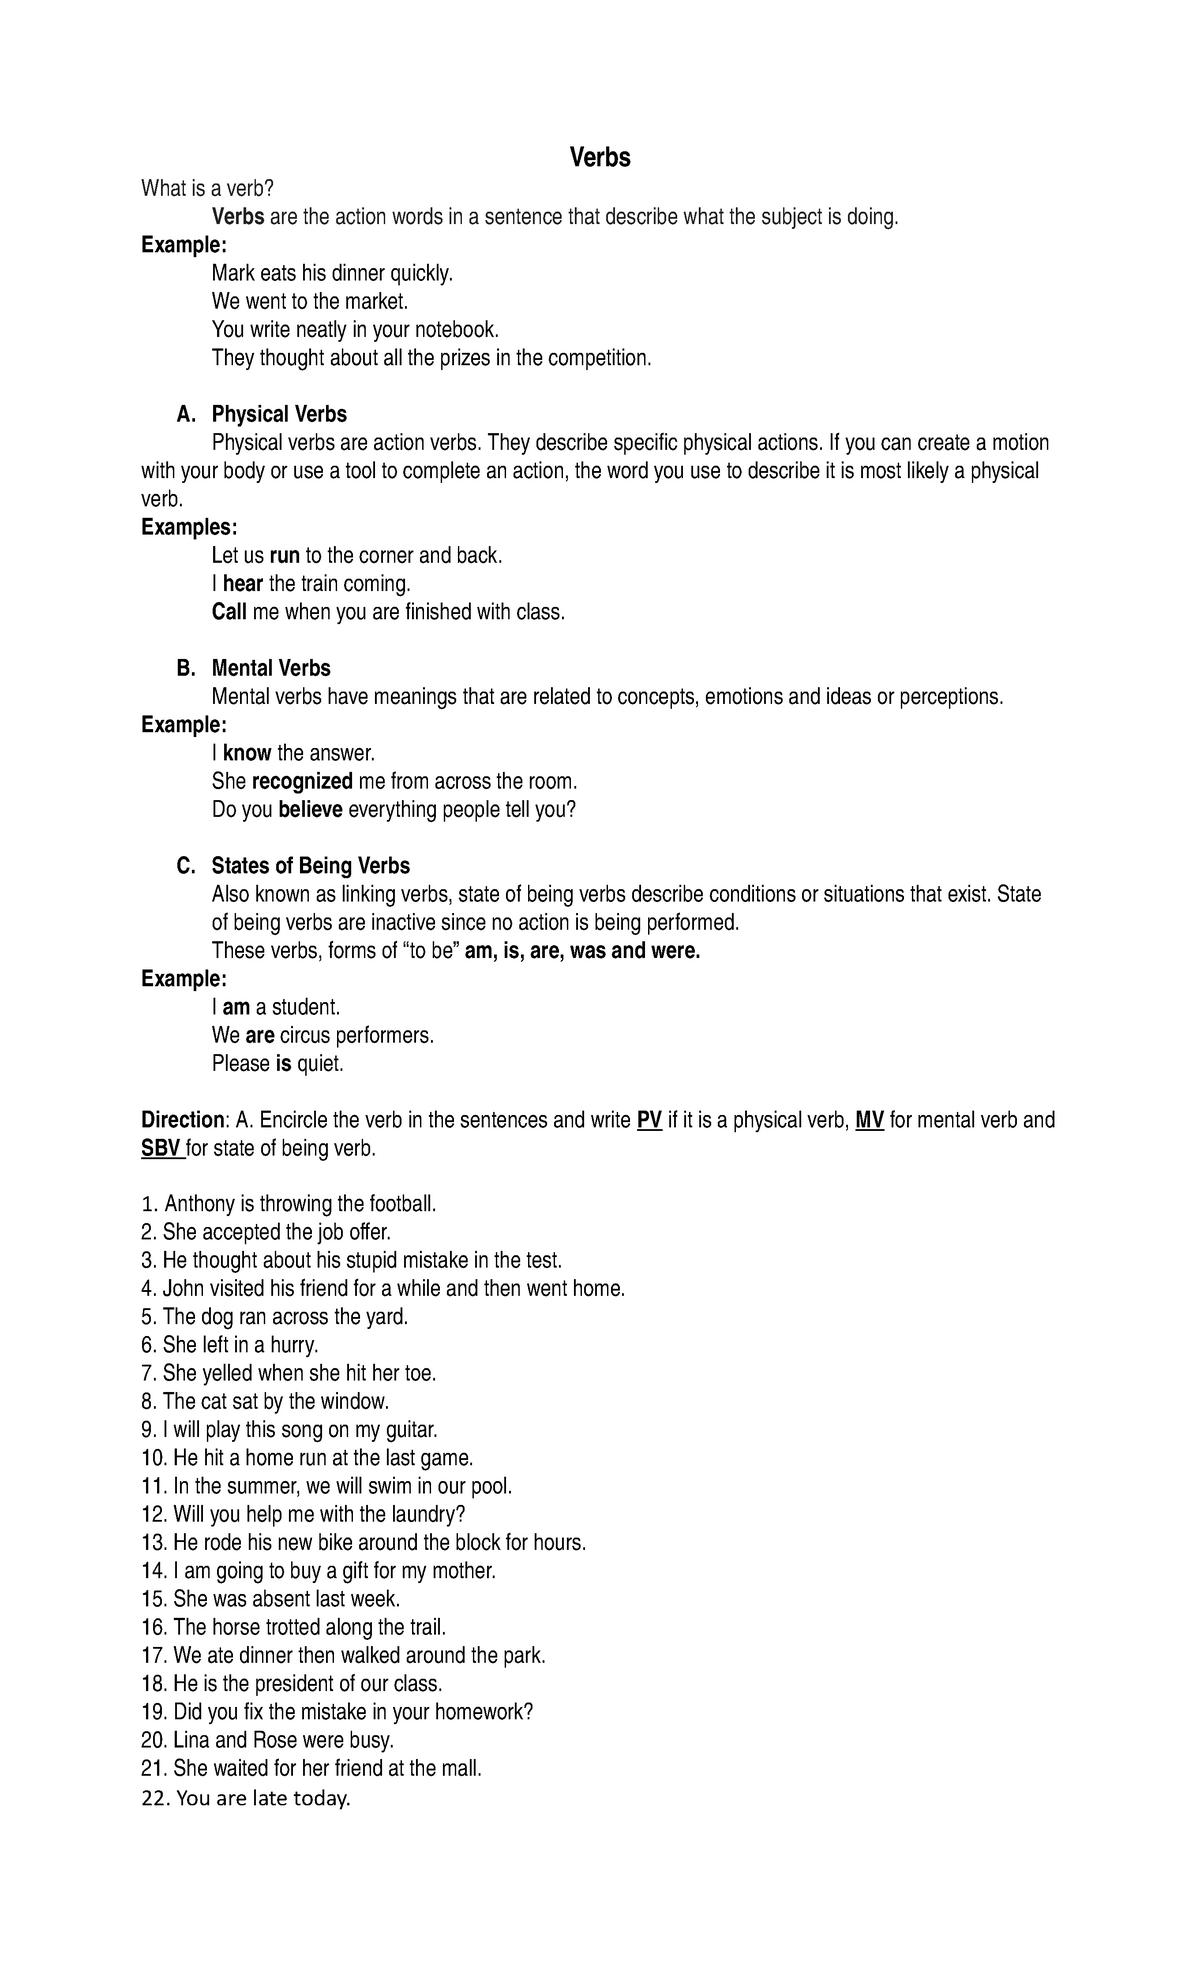 English G 7 Verb Exercises Verbs What Is A Verb Verbs Are The Action 